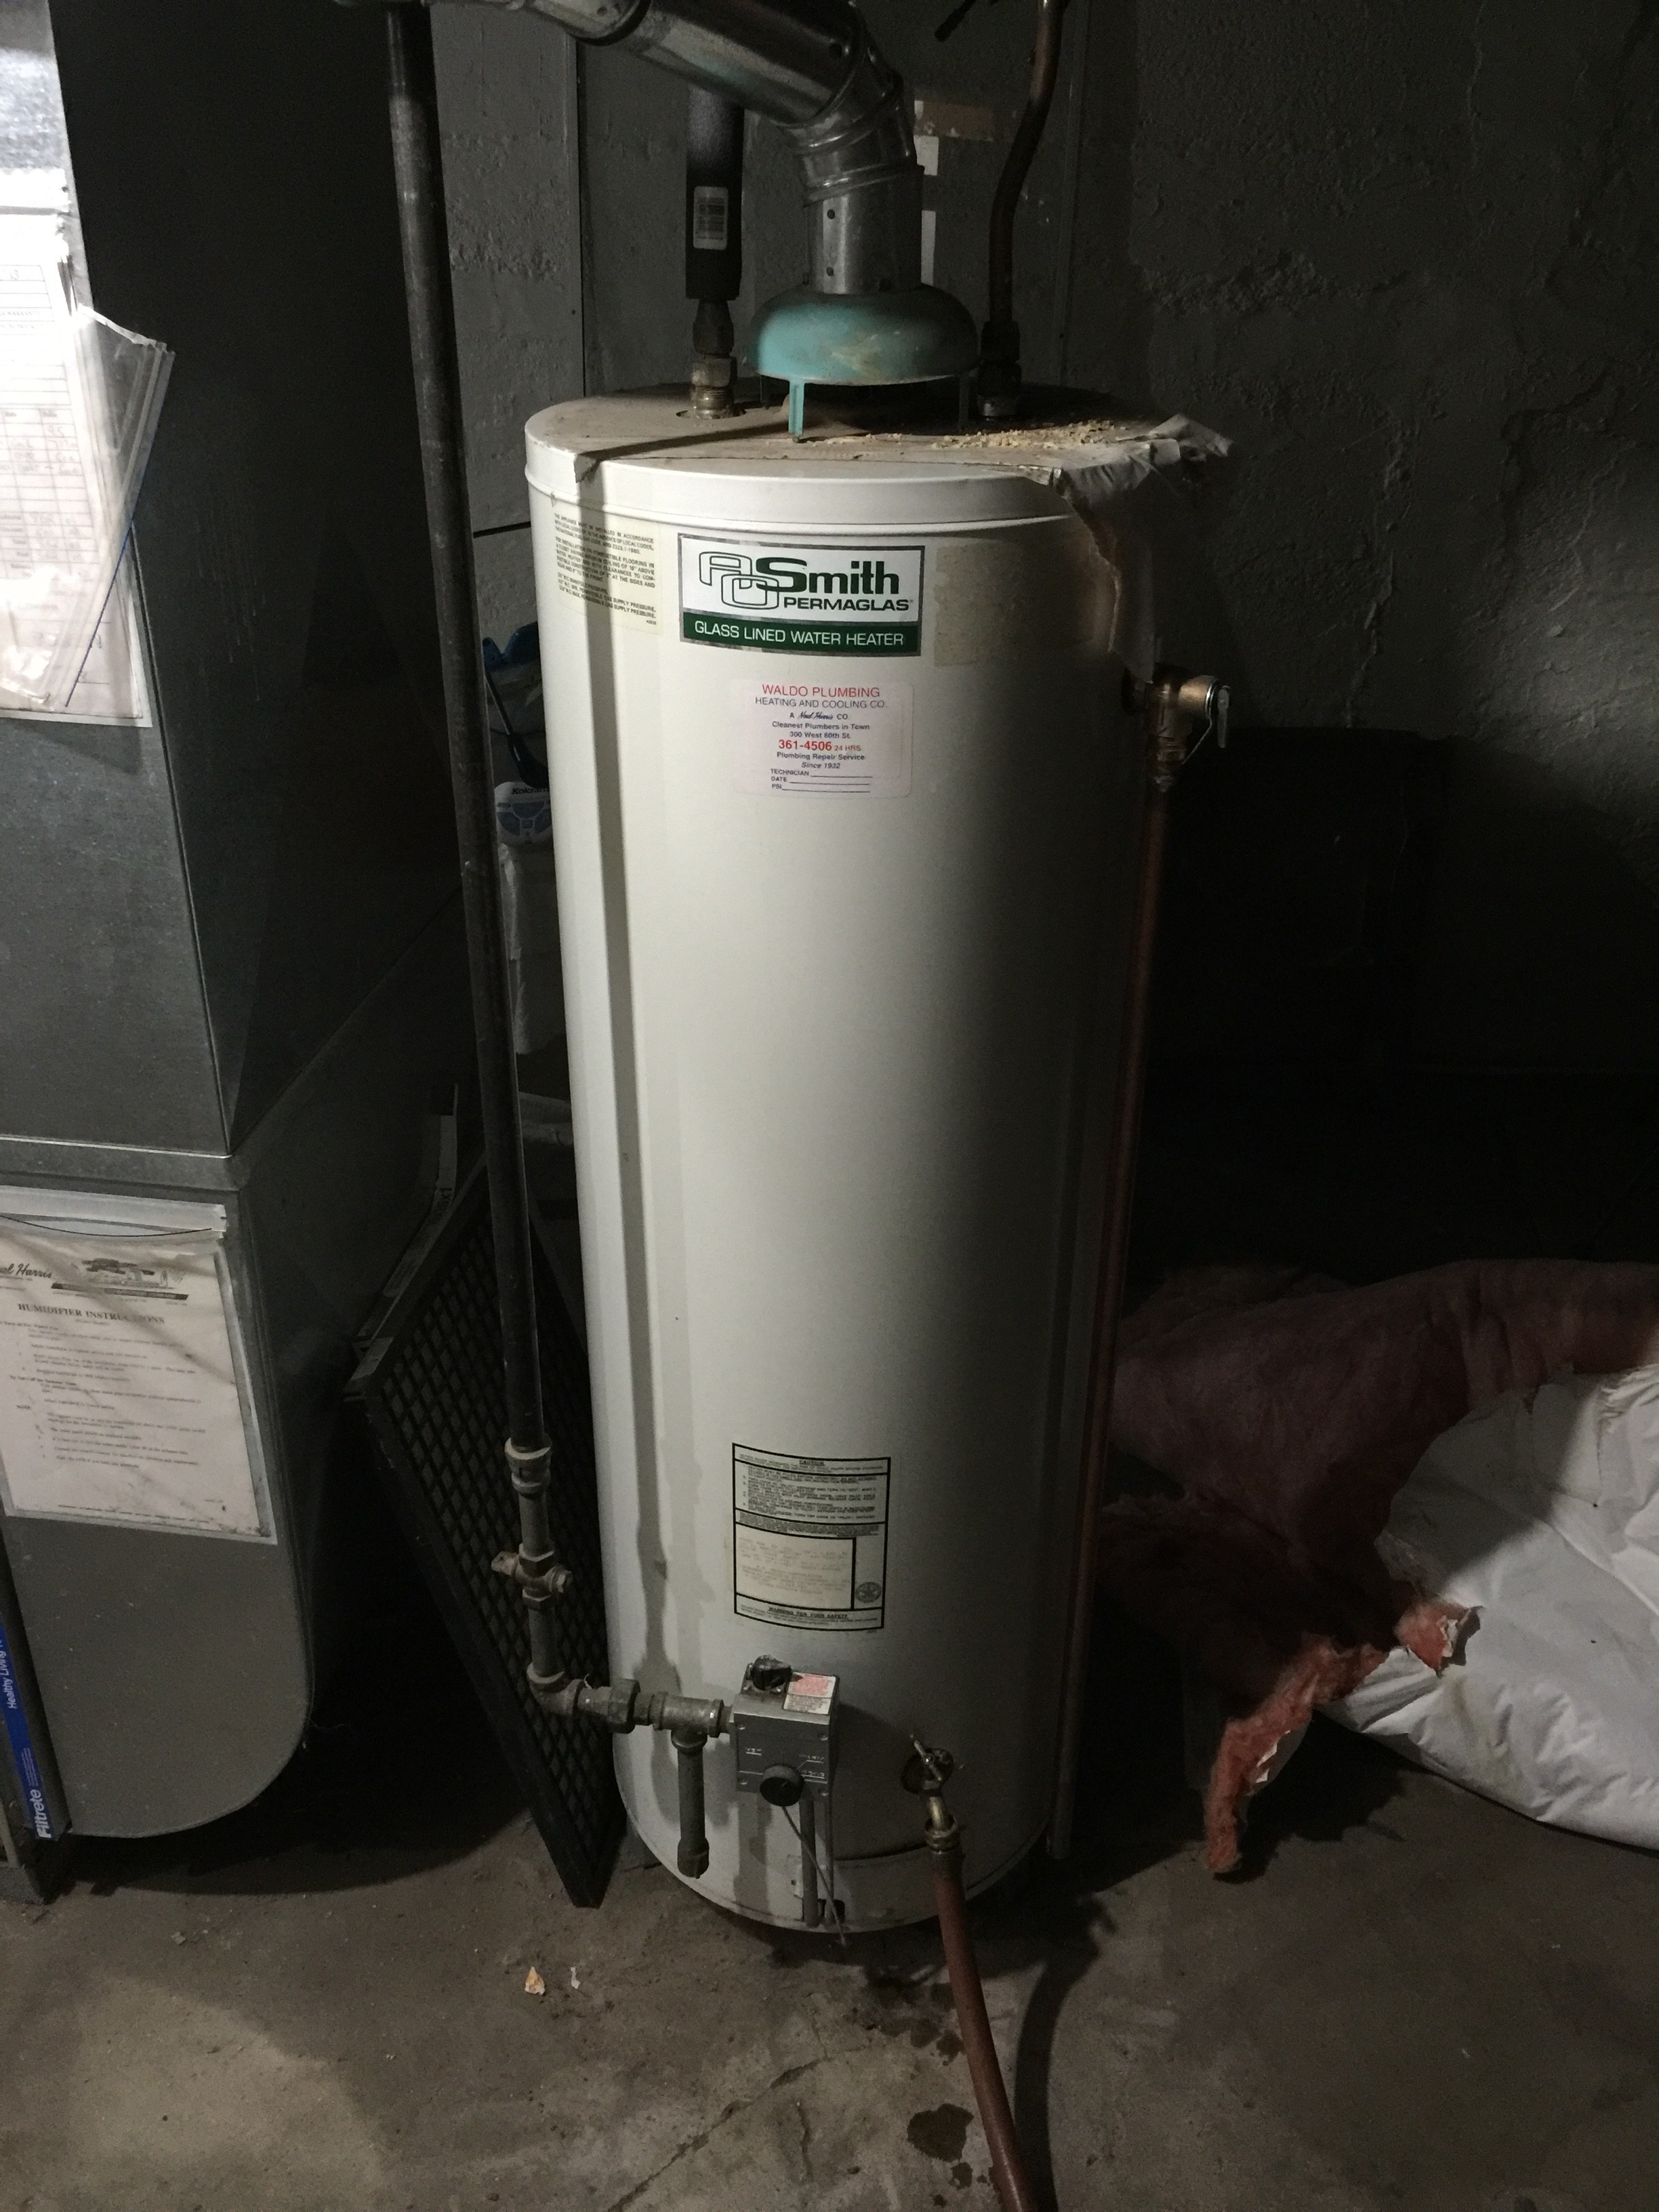 A O Smith Signature Premier 50 Gallon Short 6 Year Limited 30000 Btu Natural Gas Water Heater In The Gas Water Heaters Department At Lowes Com